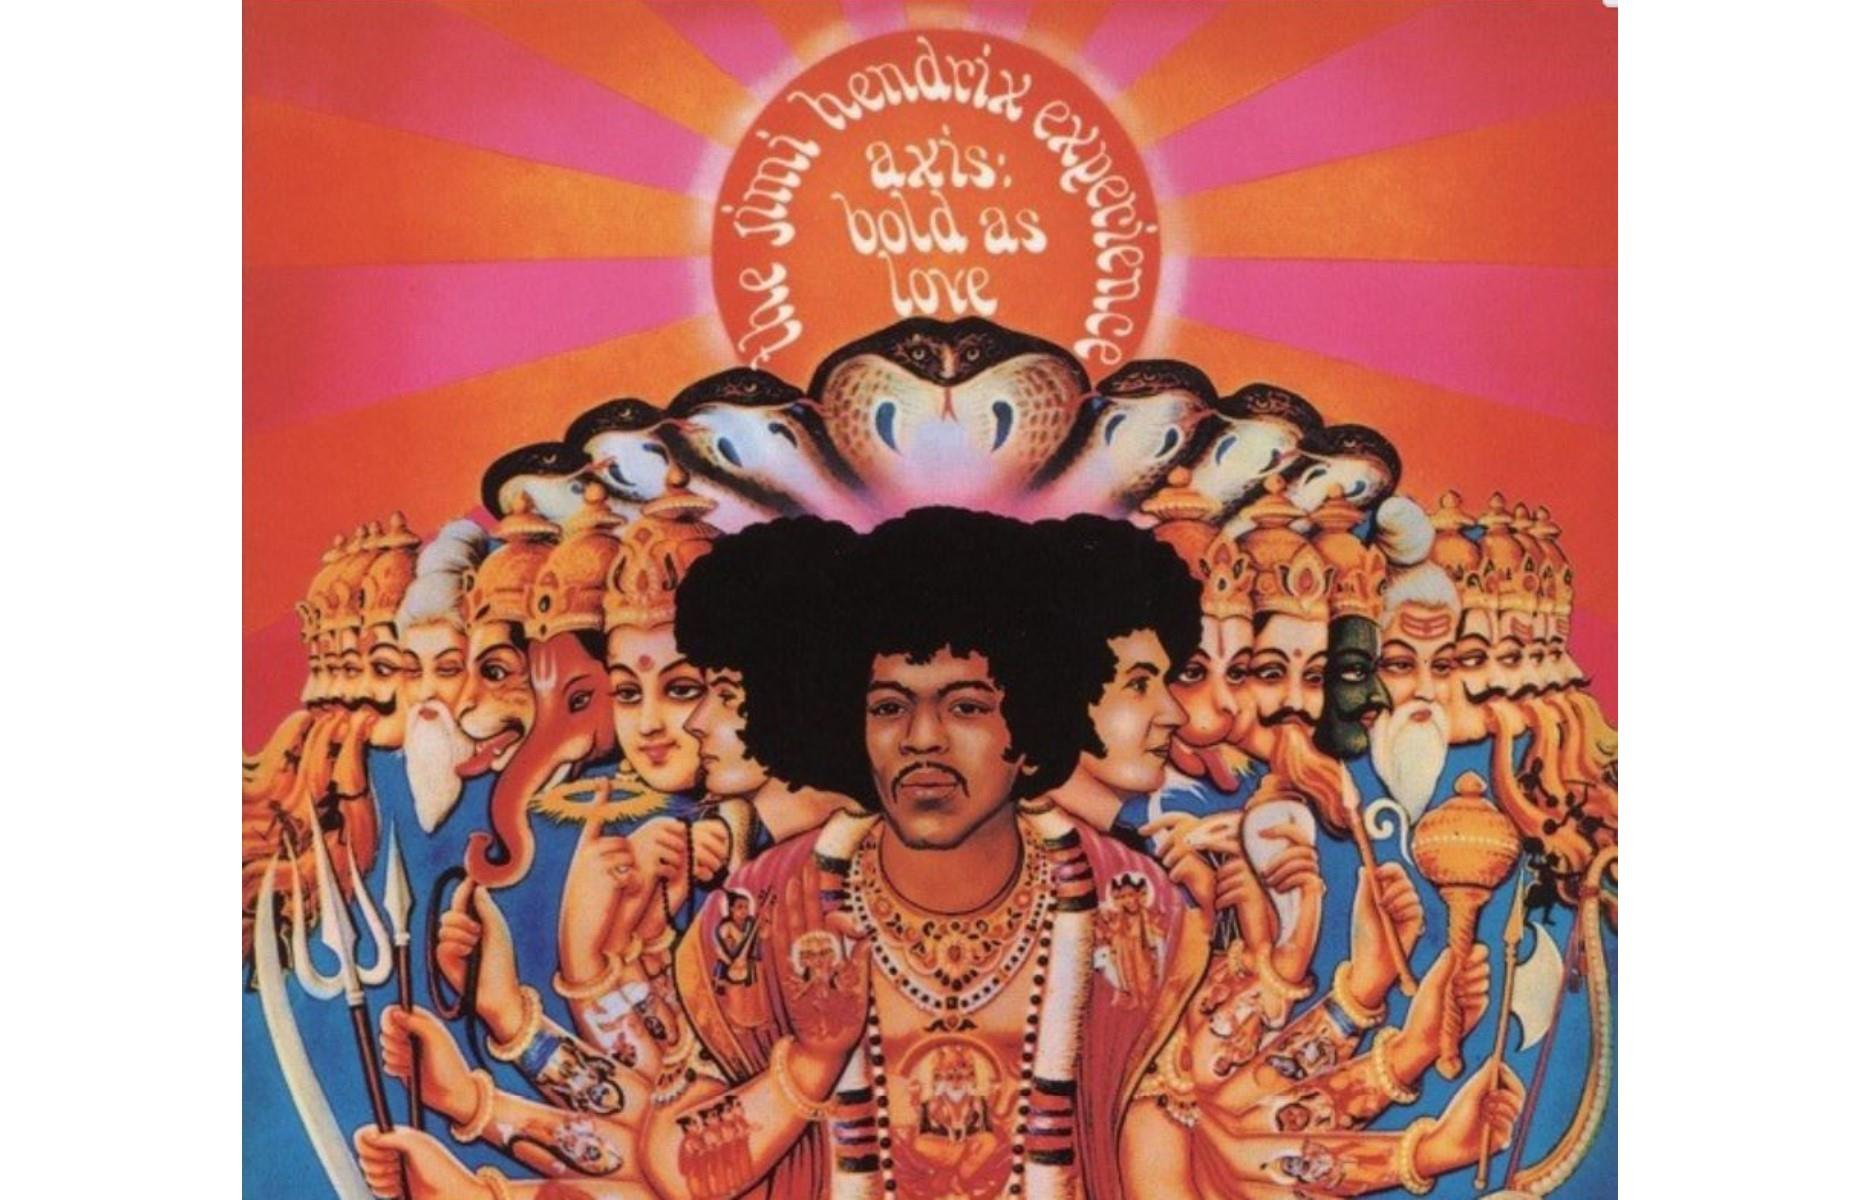 The Jimi Hendrix Experience – Axis: Bold as Love: up to £800